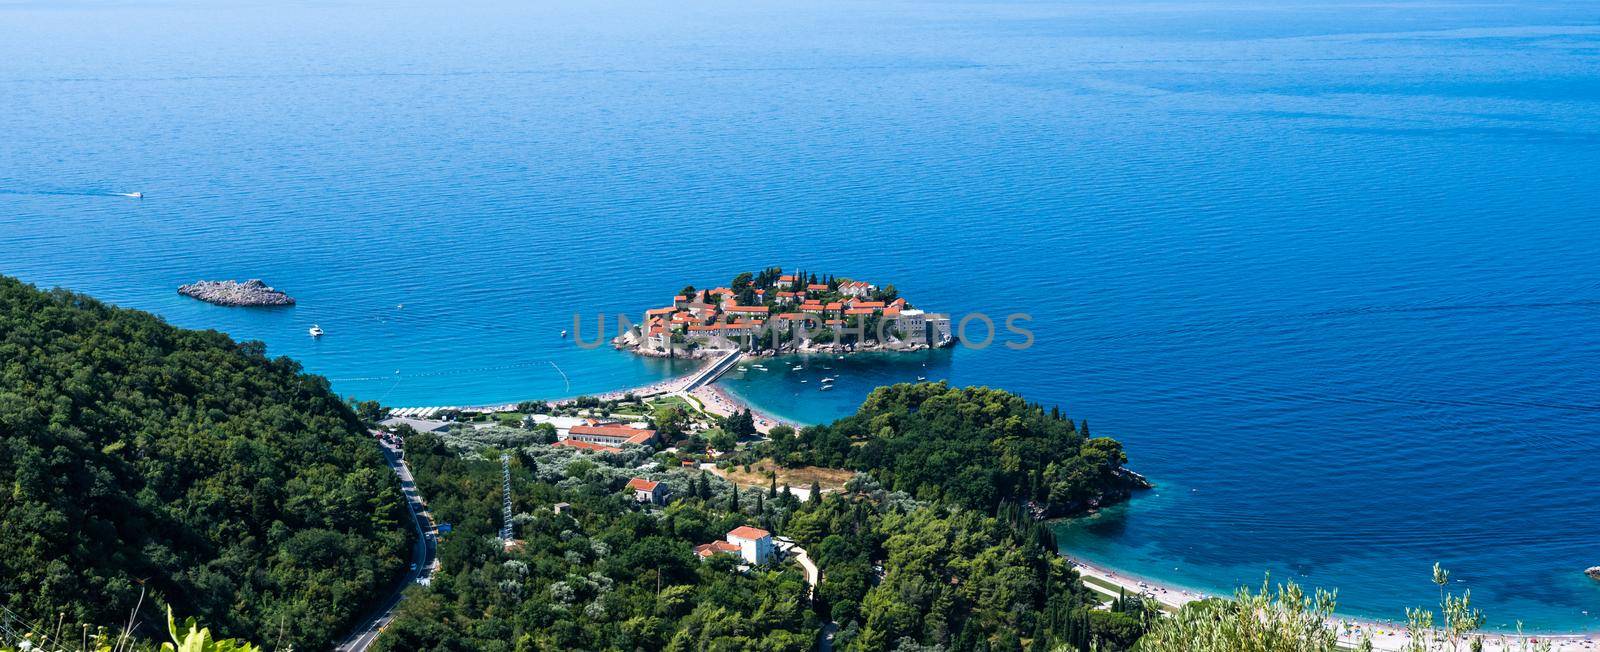 Sveti Stefan island in Montenegro from above. Scenic view on adriatic sea from mountains close to Budva